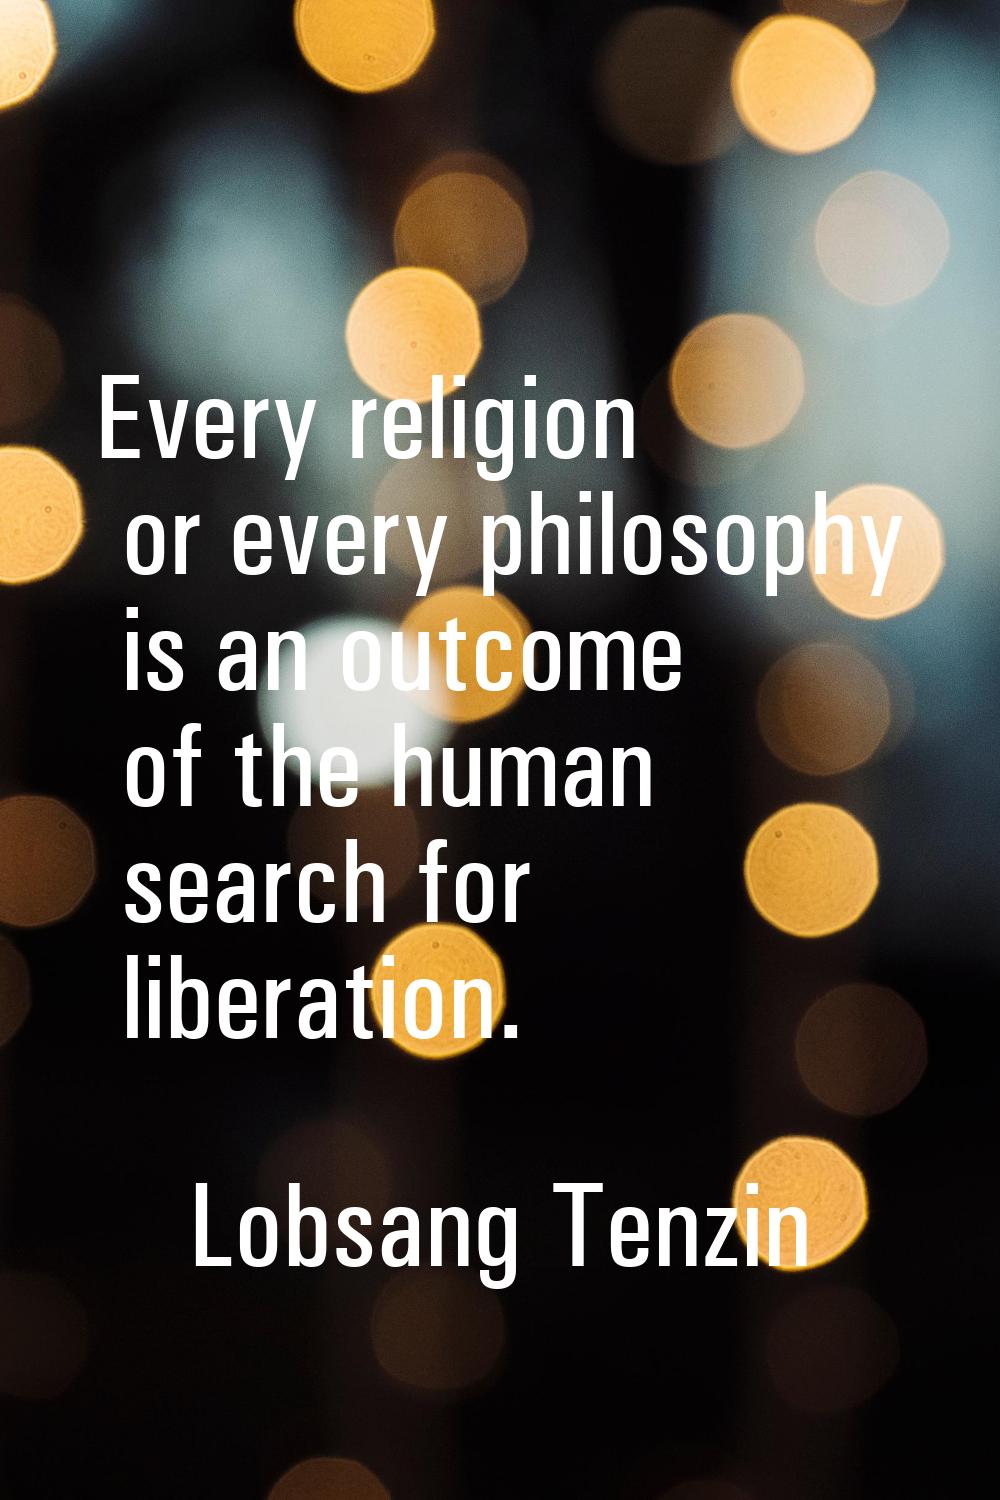 Every religion or every philosophy is an outcome of the human search for liberation.